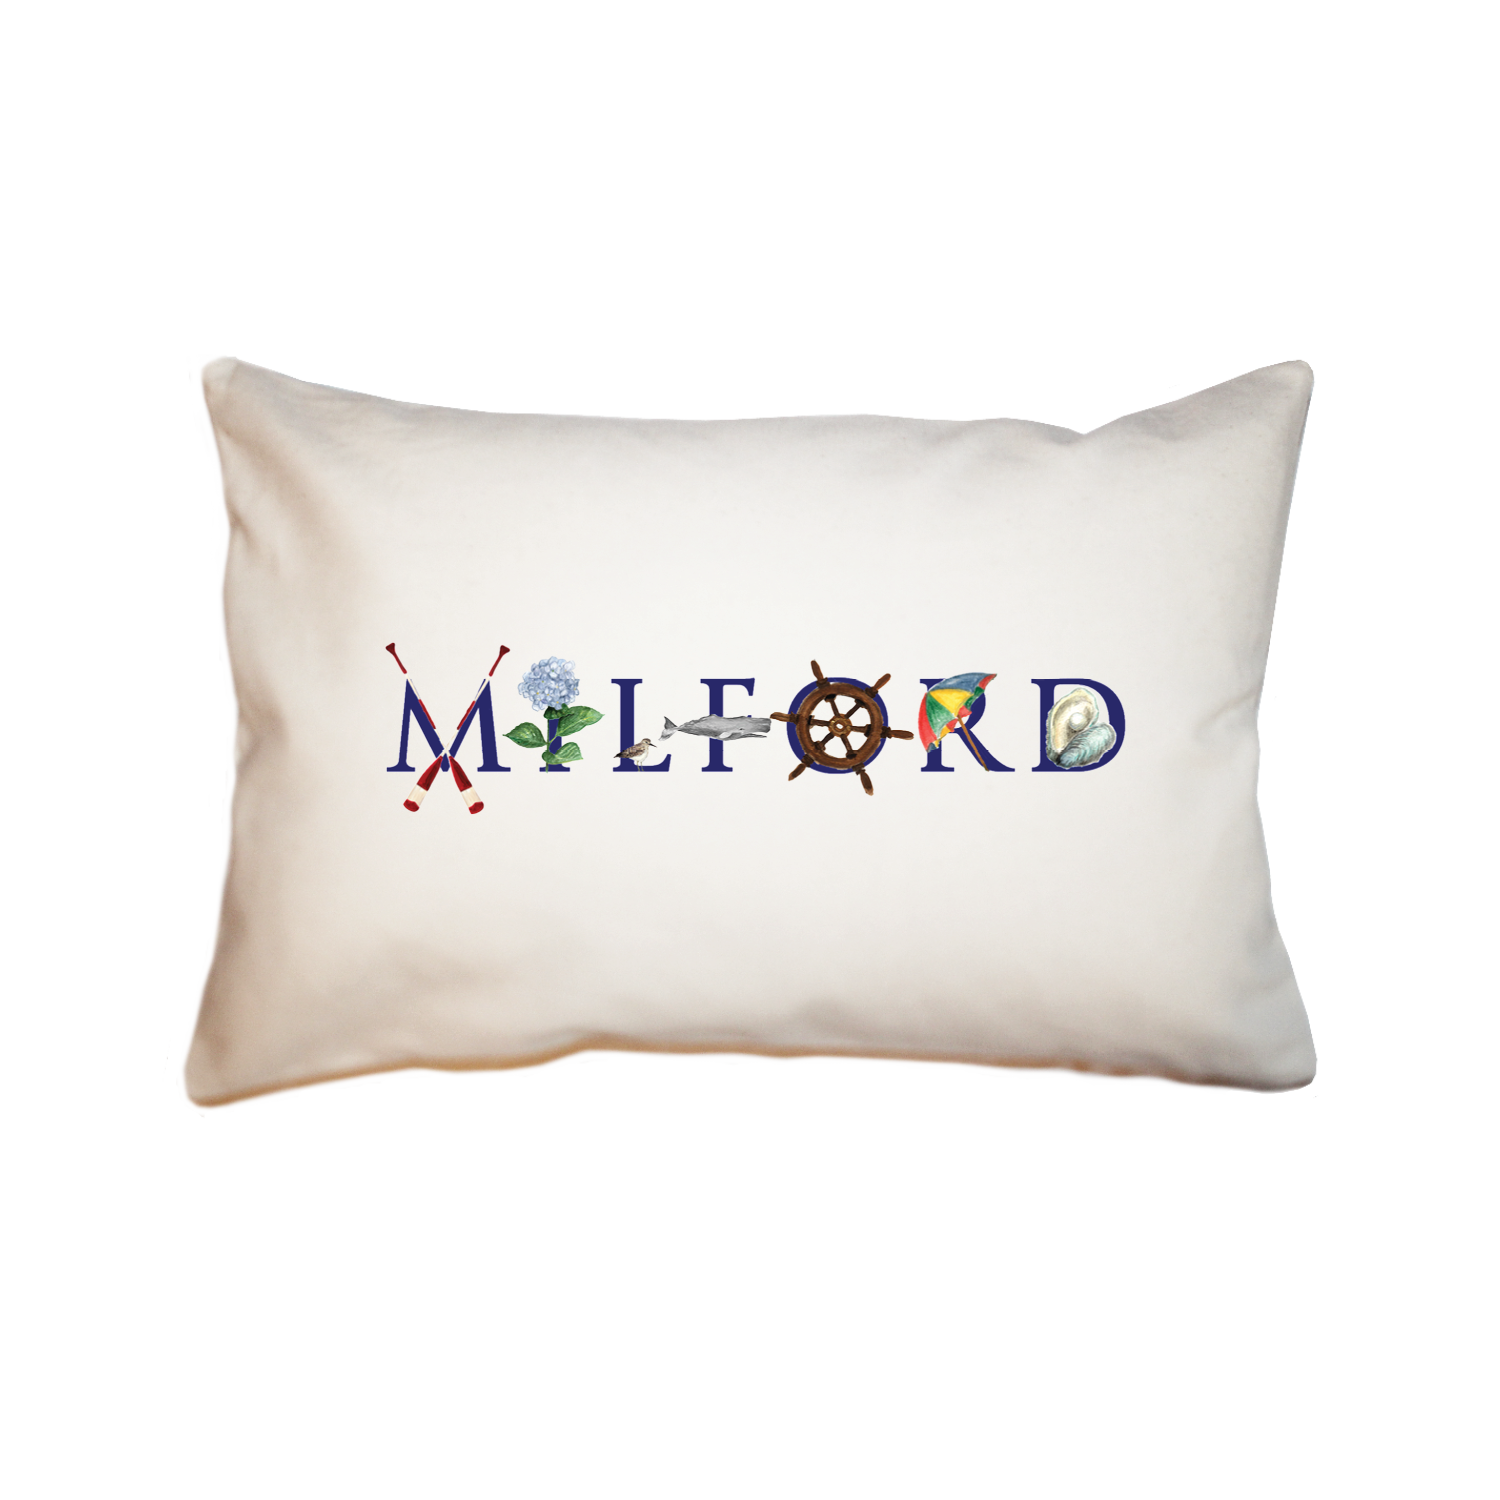 milford, ct large rectangle pillow